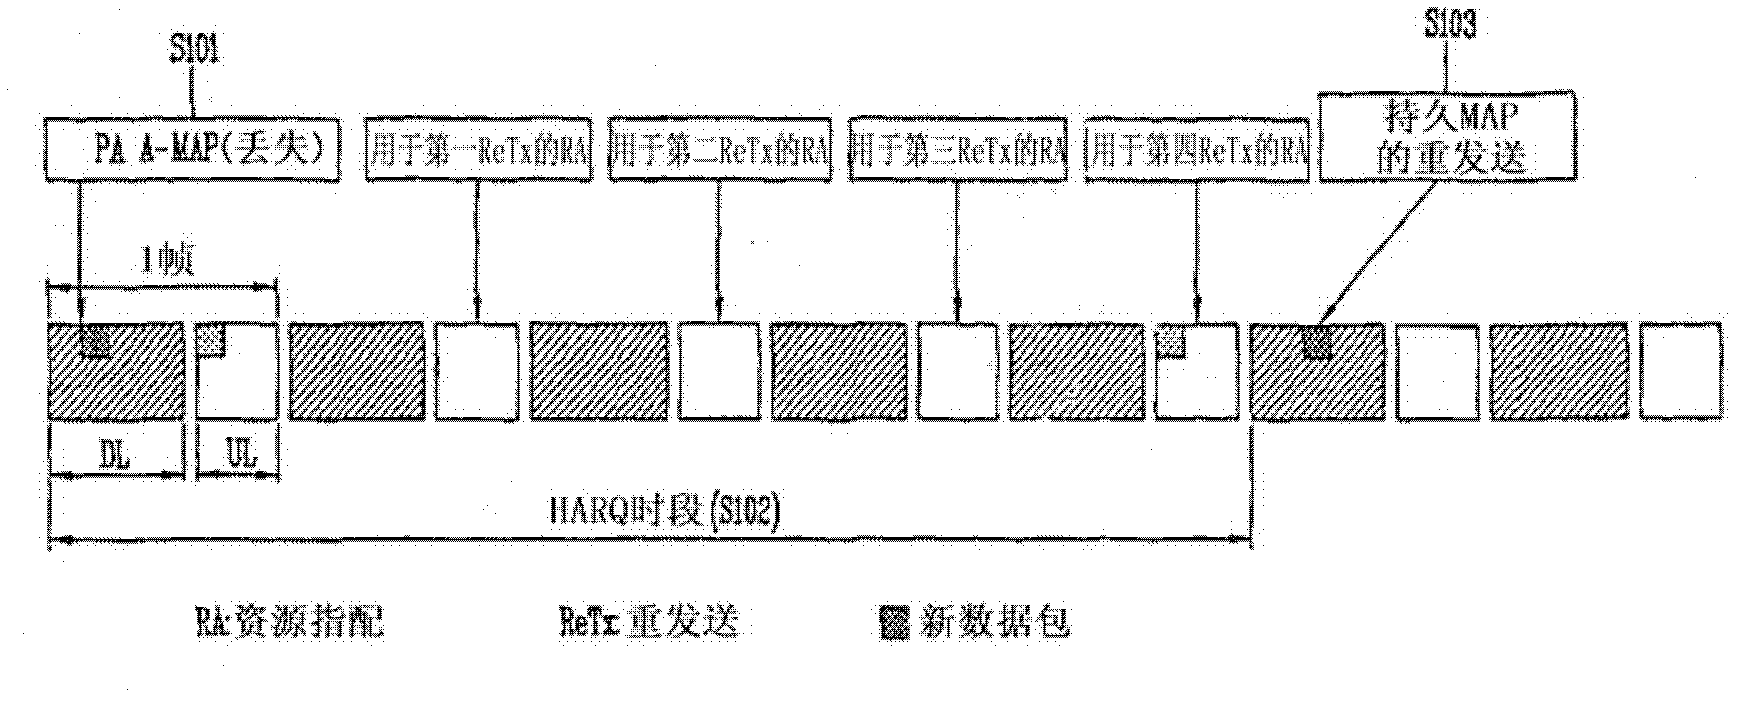 Method for allocating fixed resource in broadband wireless communication system